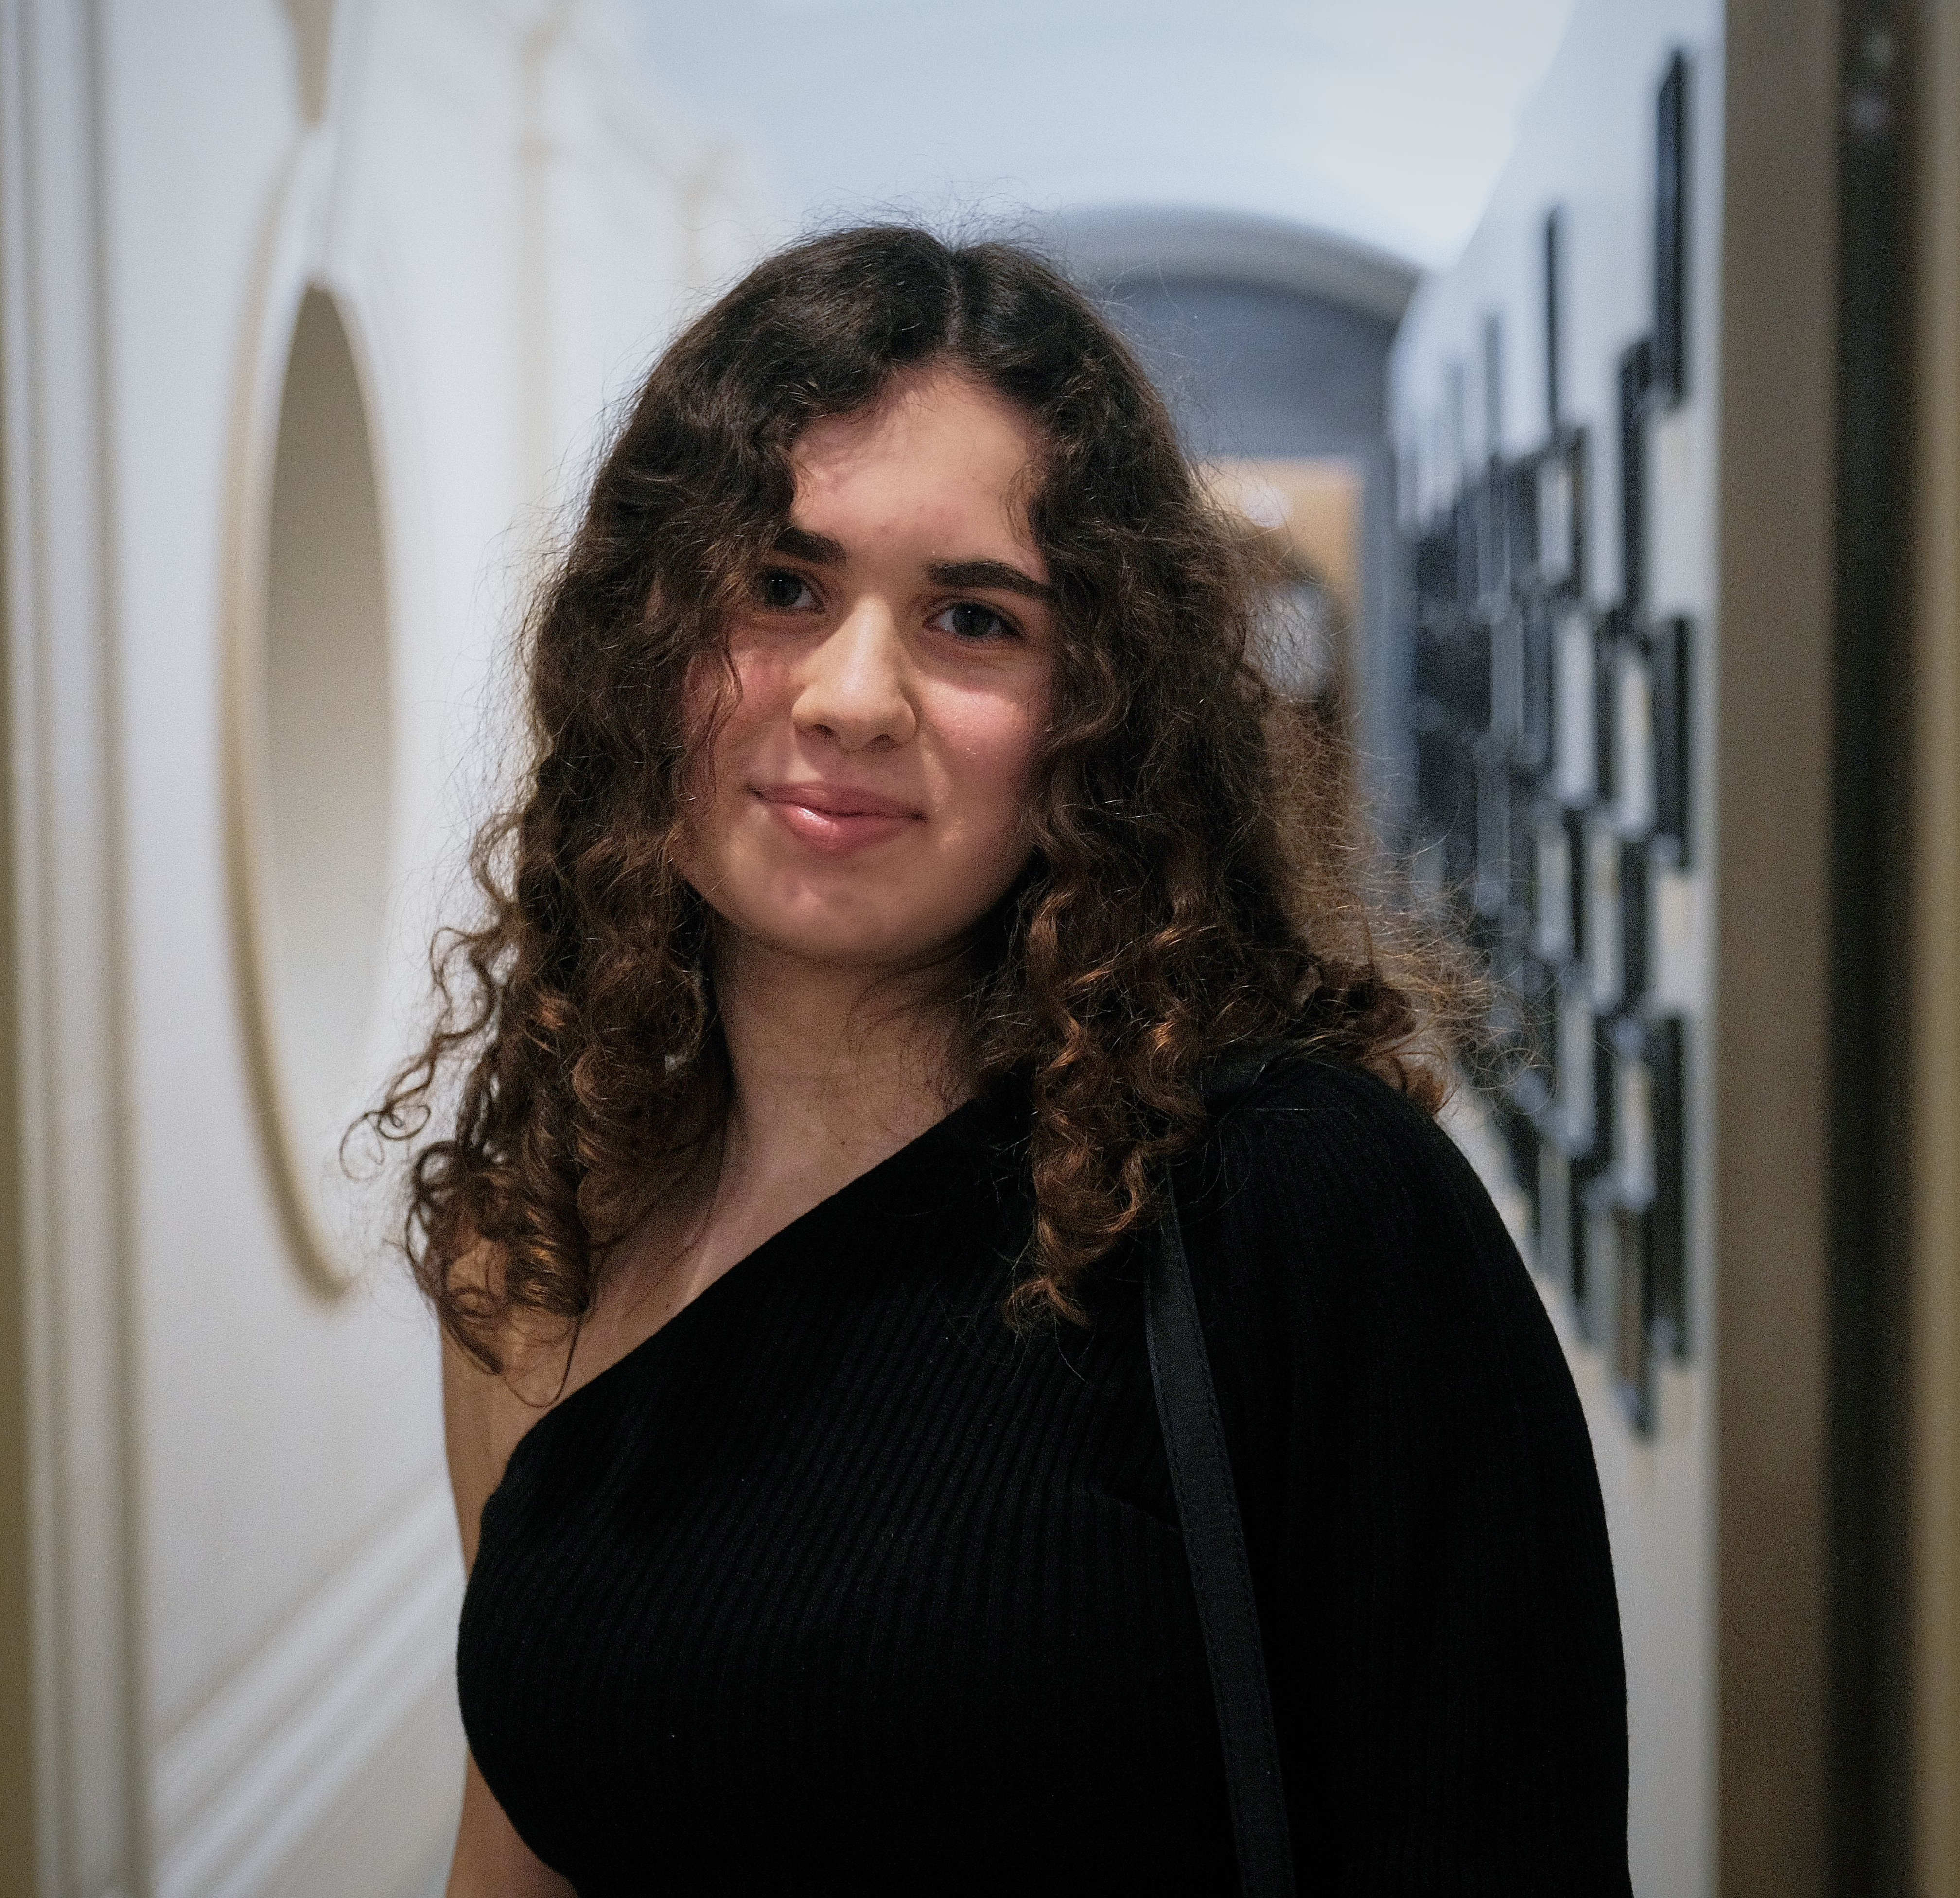 A photo of Yaprak in a black top in front of a corridor